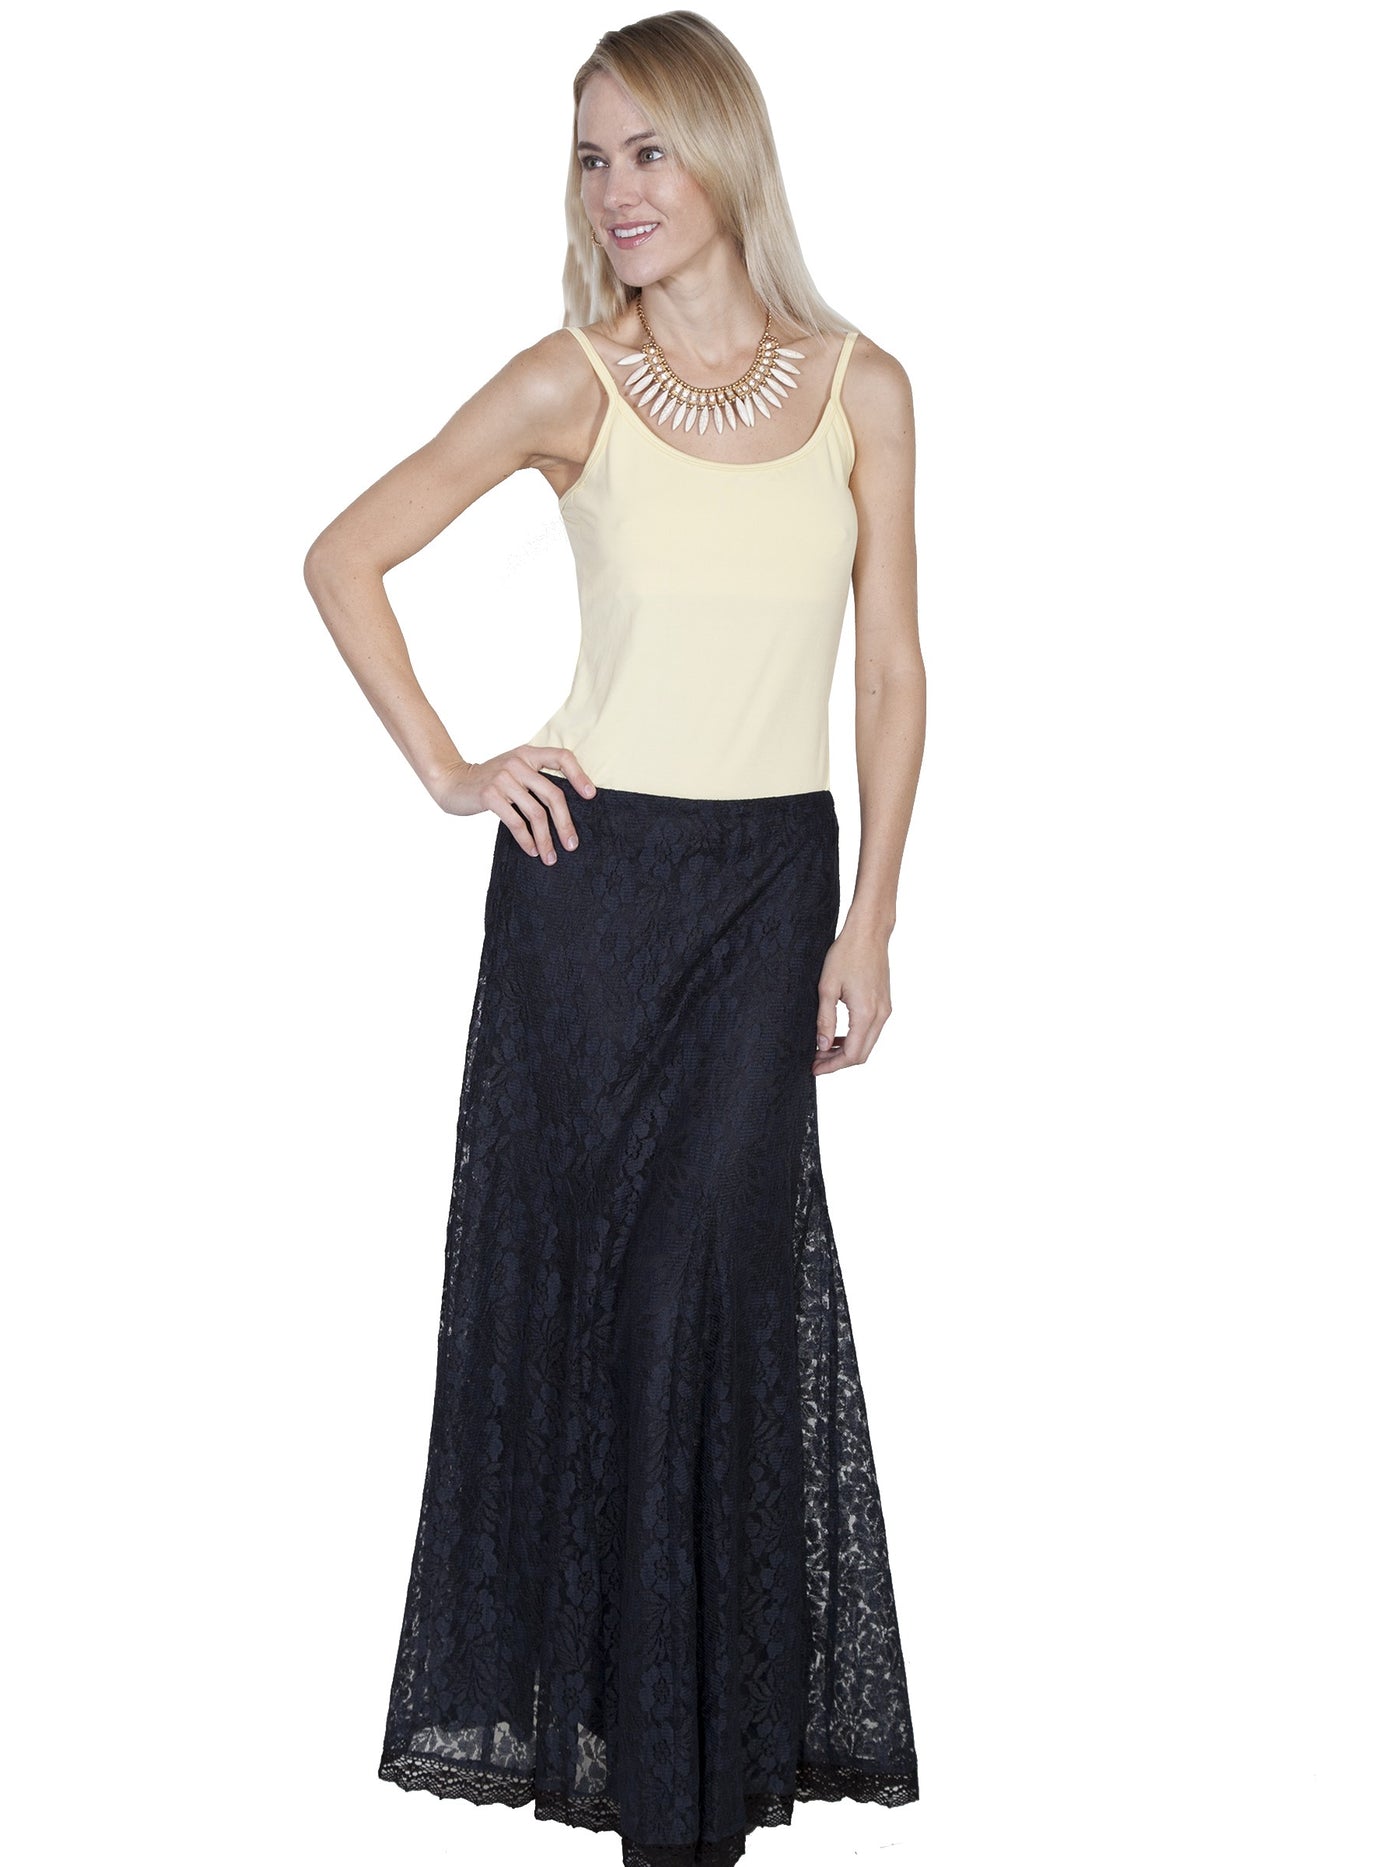 Western Style Long Skirt in Black - SOLD OUT